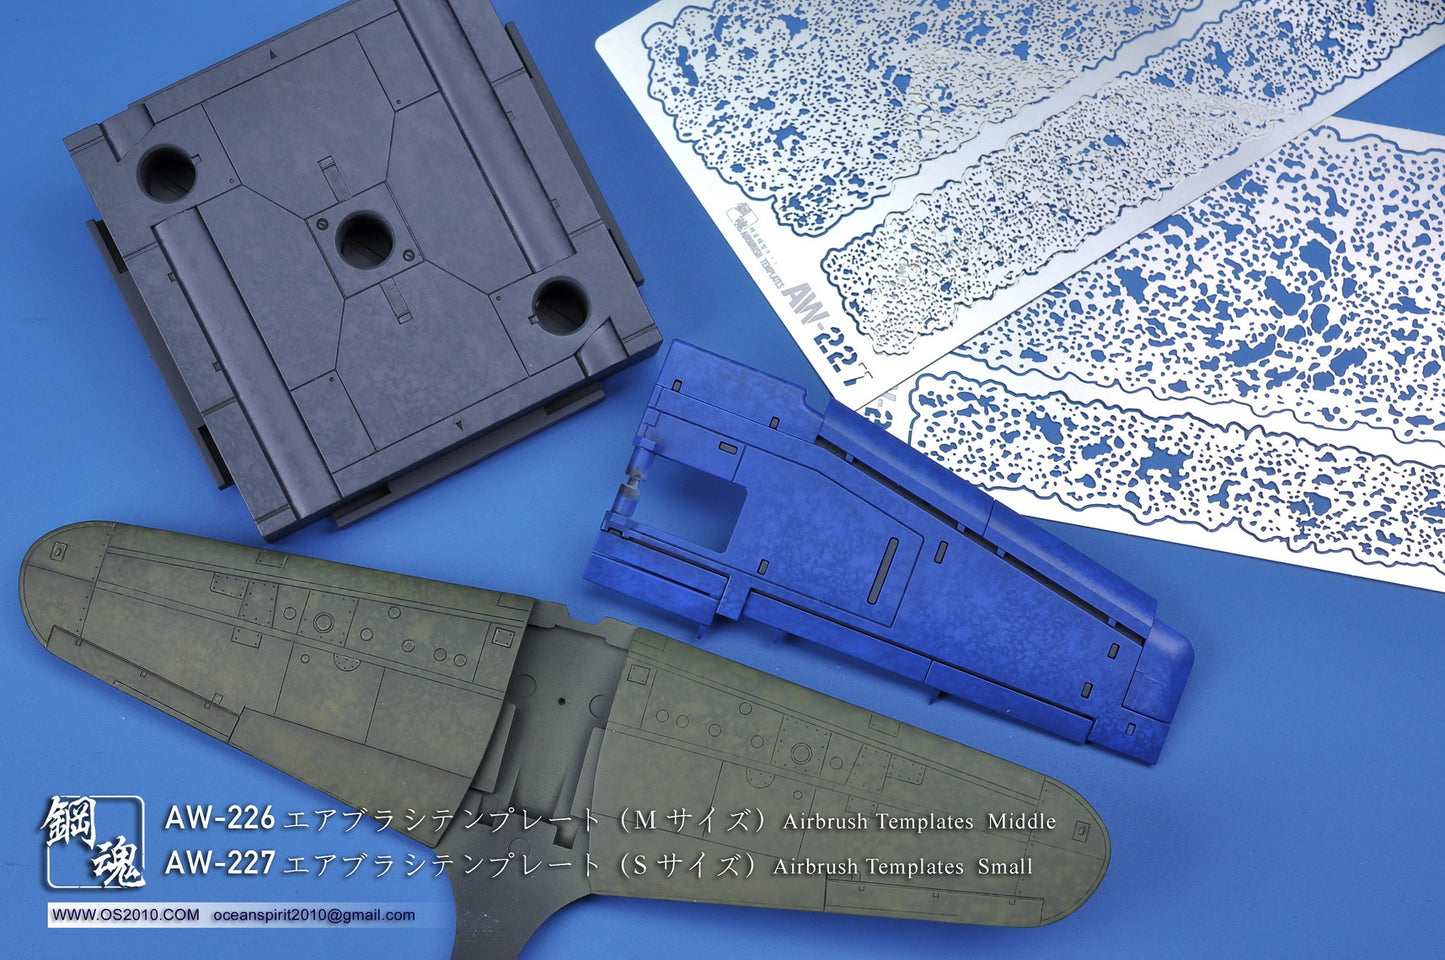 MADWORKS AW-227 AIRBRUSH TEMPLATE SMALL